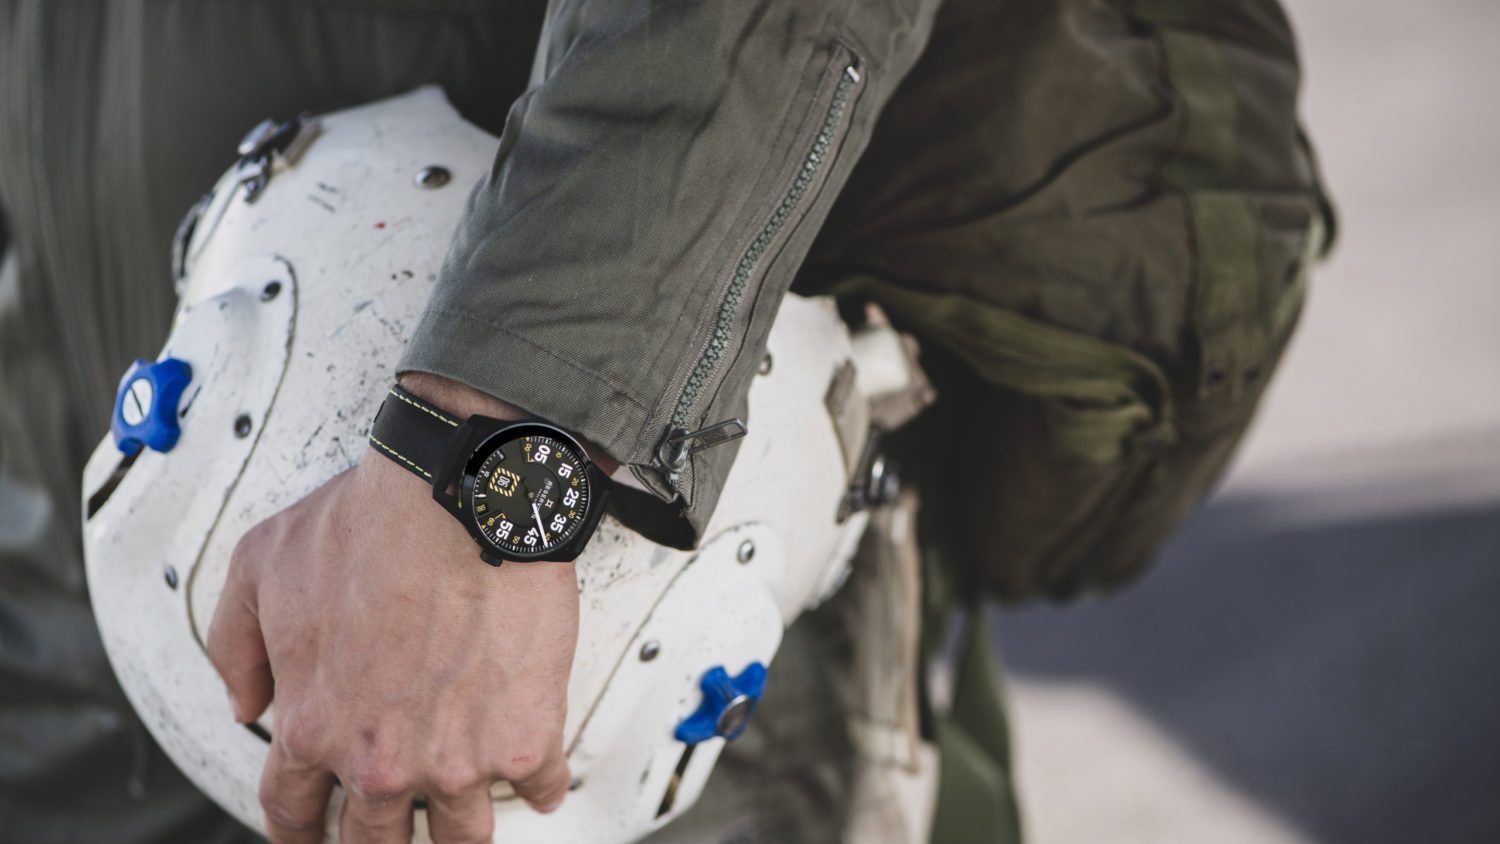 The RESERVOIR Airfight collection takes its inspiration from fighter aircraft, and centers on the black color of the on-board flight instruments.